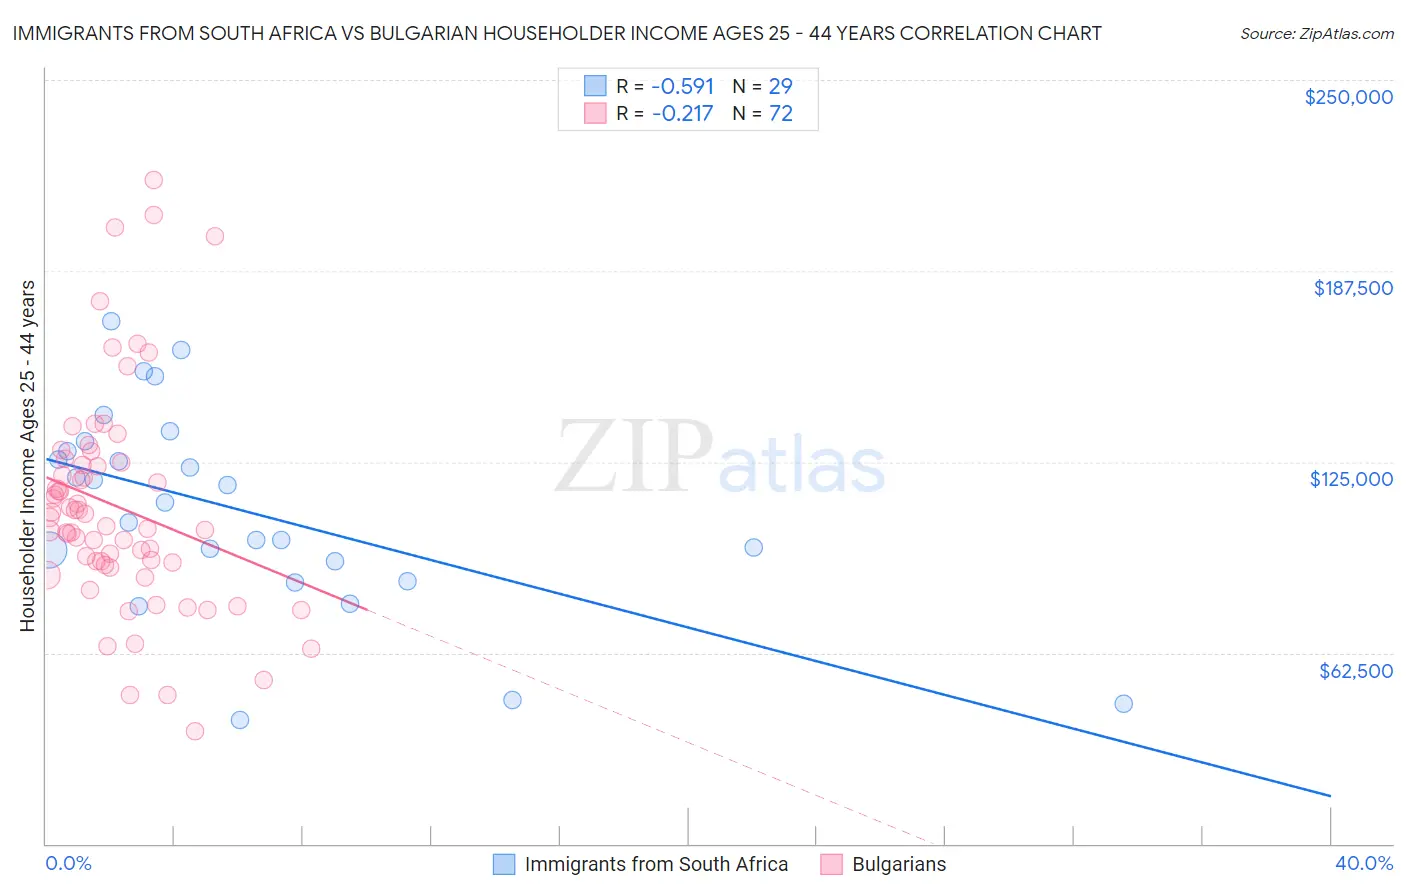 Immigrants from South Africa vs Bulgarian Householder Income Ages 25 - 44 years